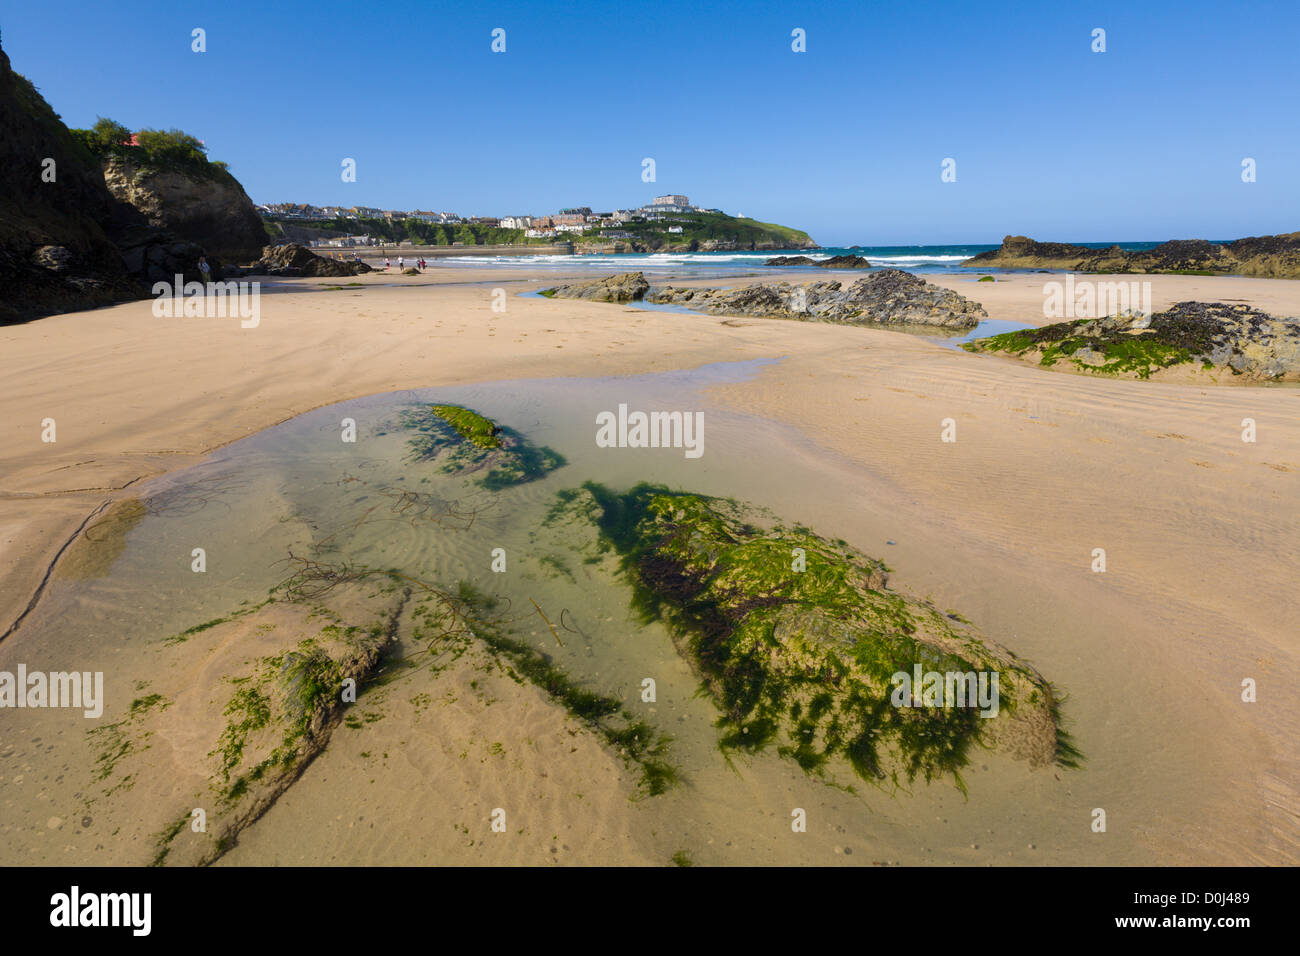 Grande plage ouest, Newquay, Cornwall, Angleterre Banque D'Images